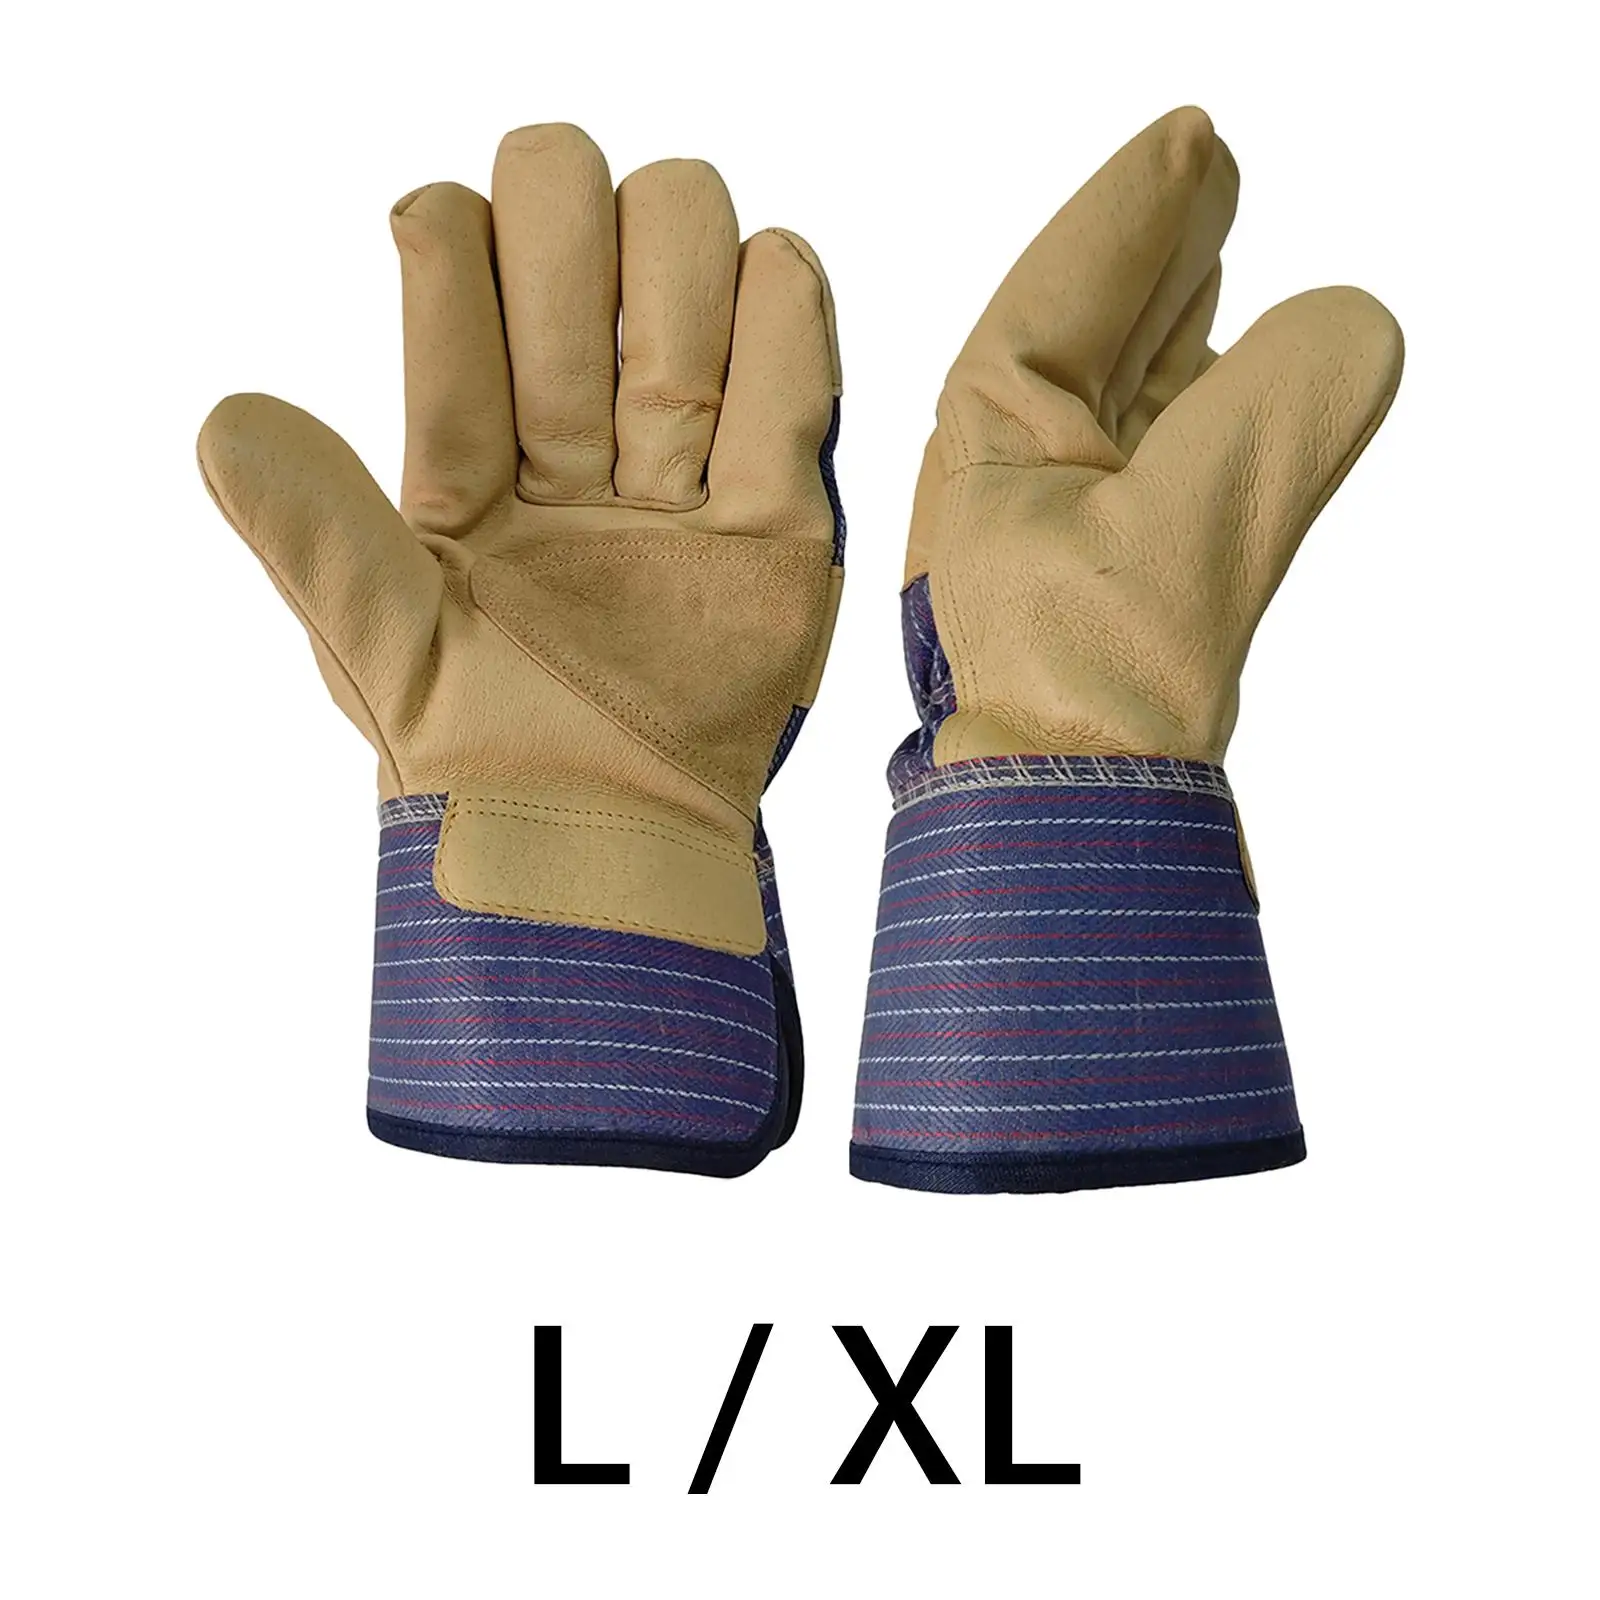 Welding Gloves with Reinforced Palm Animal Handling Glove Welding Accessories Protection Gloves for Grill Warehouse Stove Baking